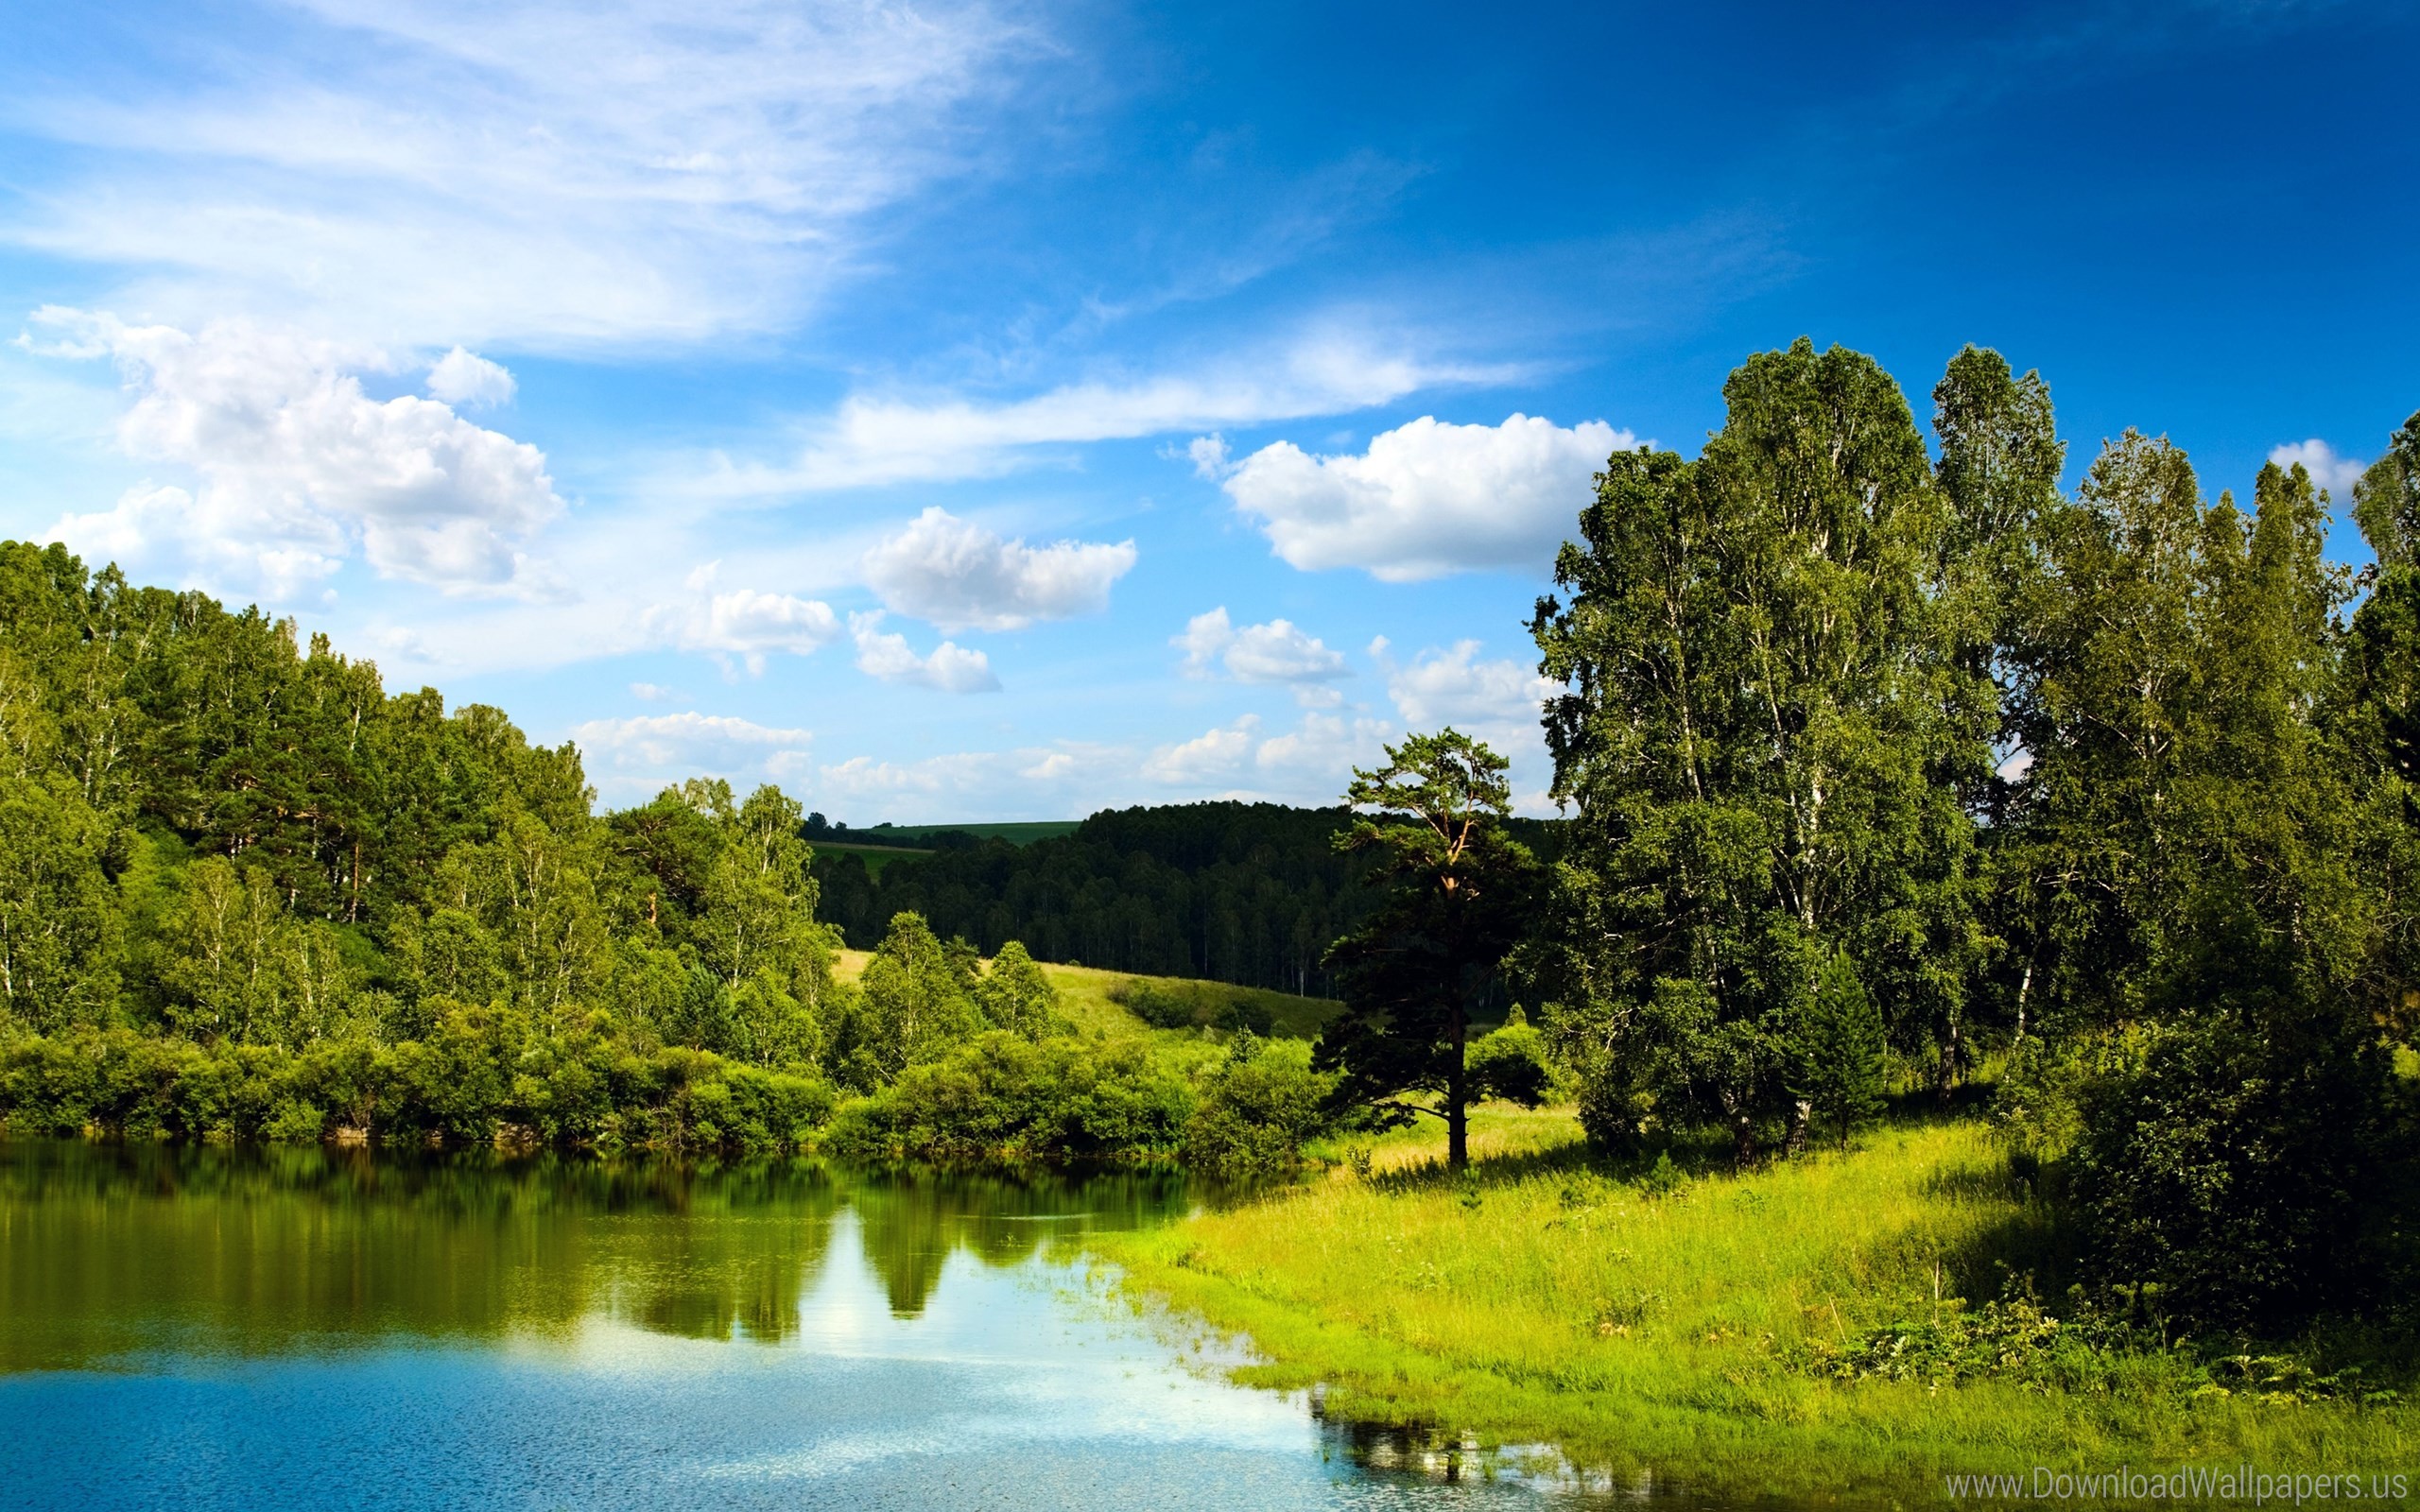 2560x1600 Download Widescreen 16:10  - Blue Sky, Blue Sky, Clouds, Forest,  Landscape, Mirror Lake, Reflection, Trees, Water Wallpaper